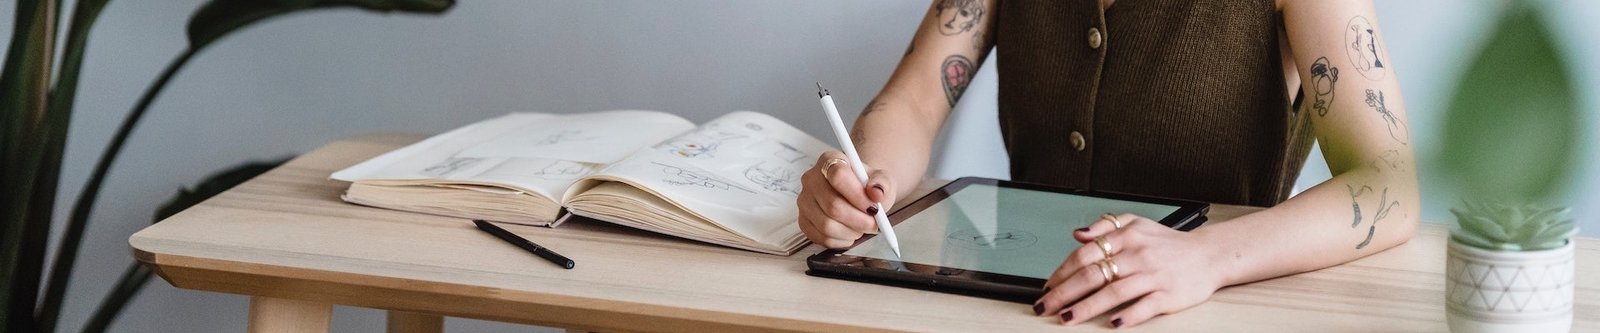 Woman with tattoos on her arms drawing on her Ipad on a desk with a book next to her for inspiration